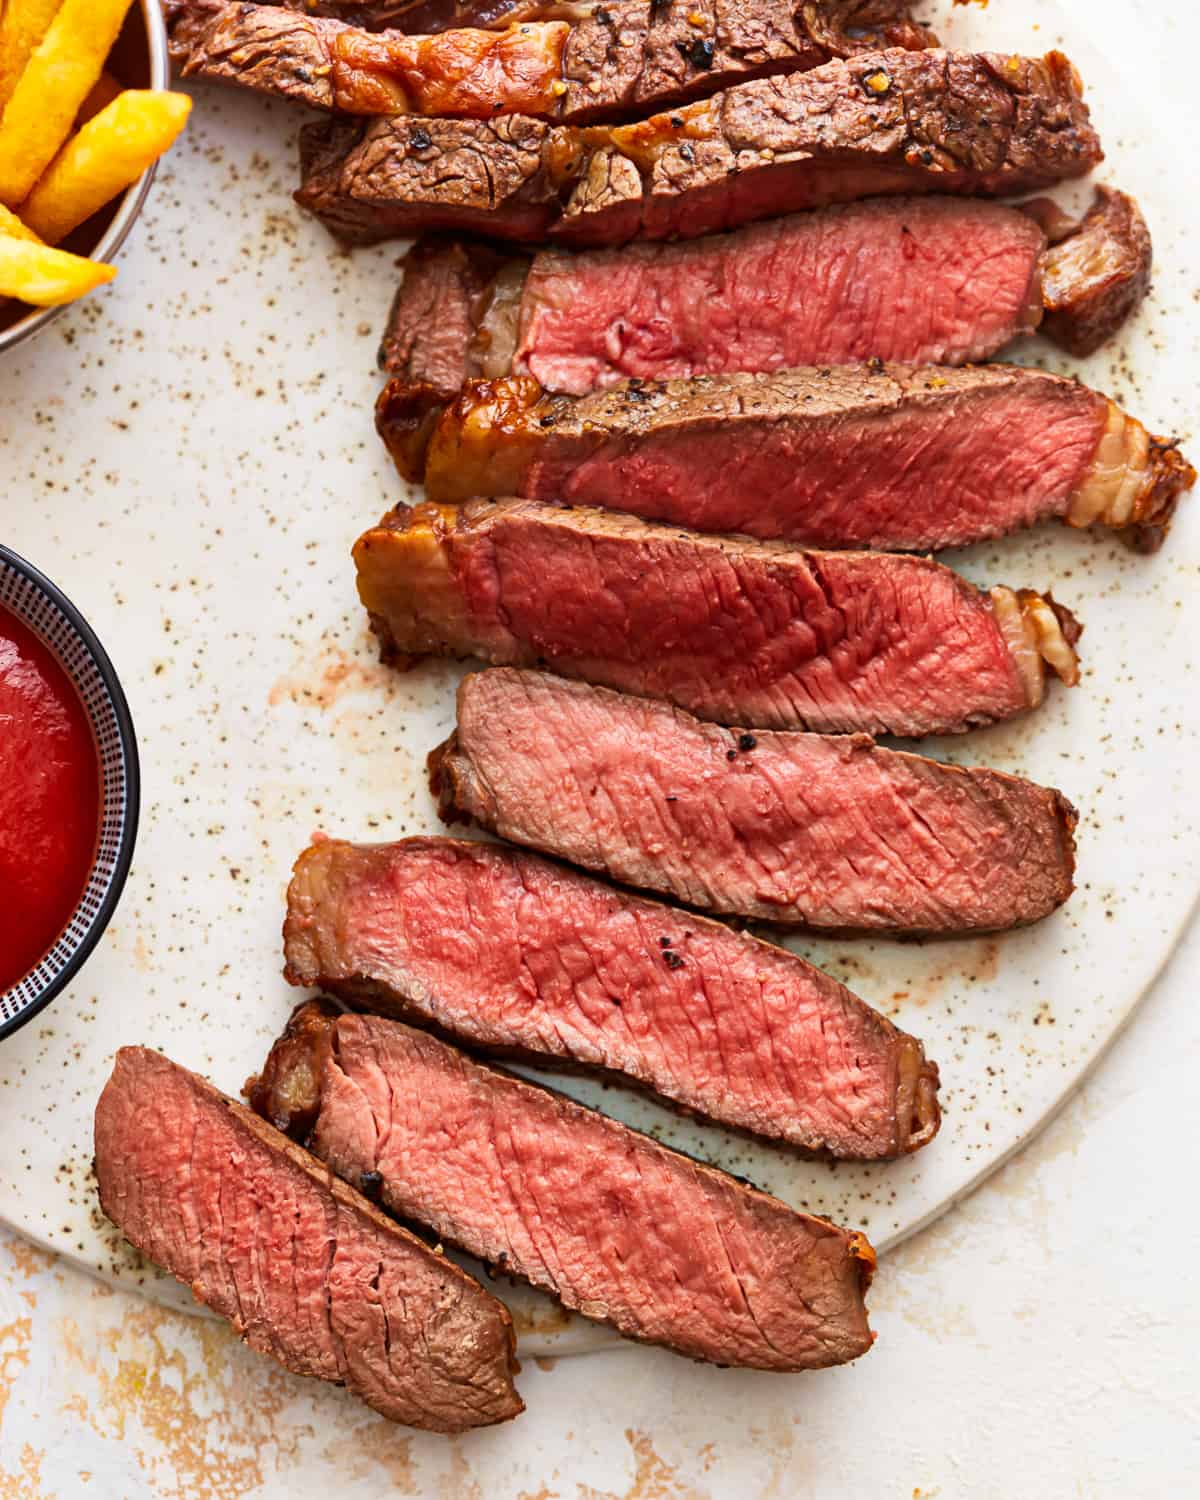 Air fryer steak with ketchup and fries on a white plate.